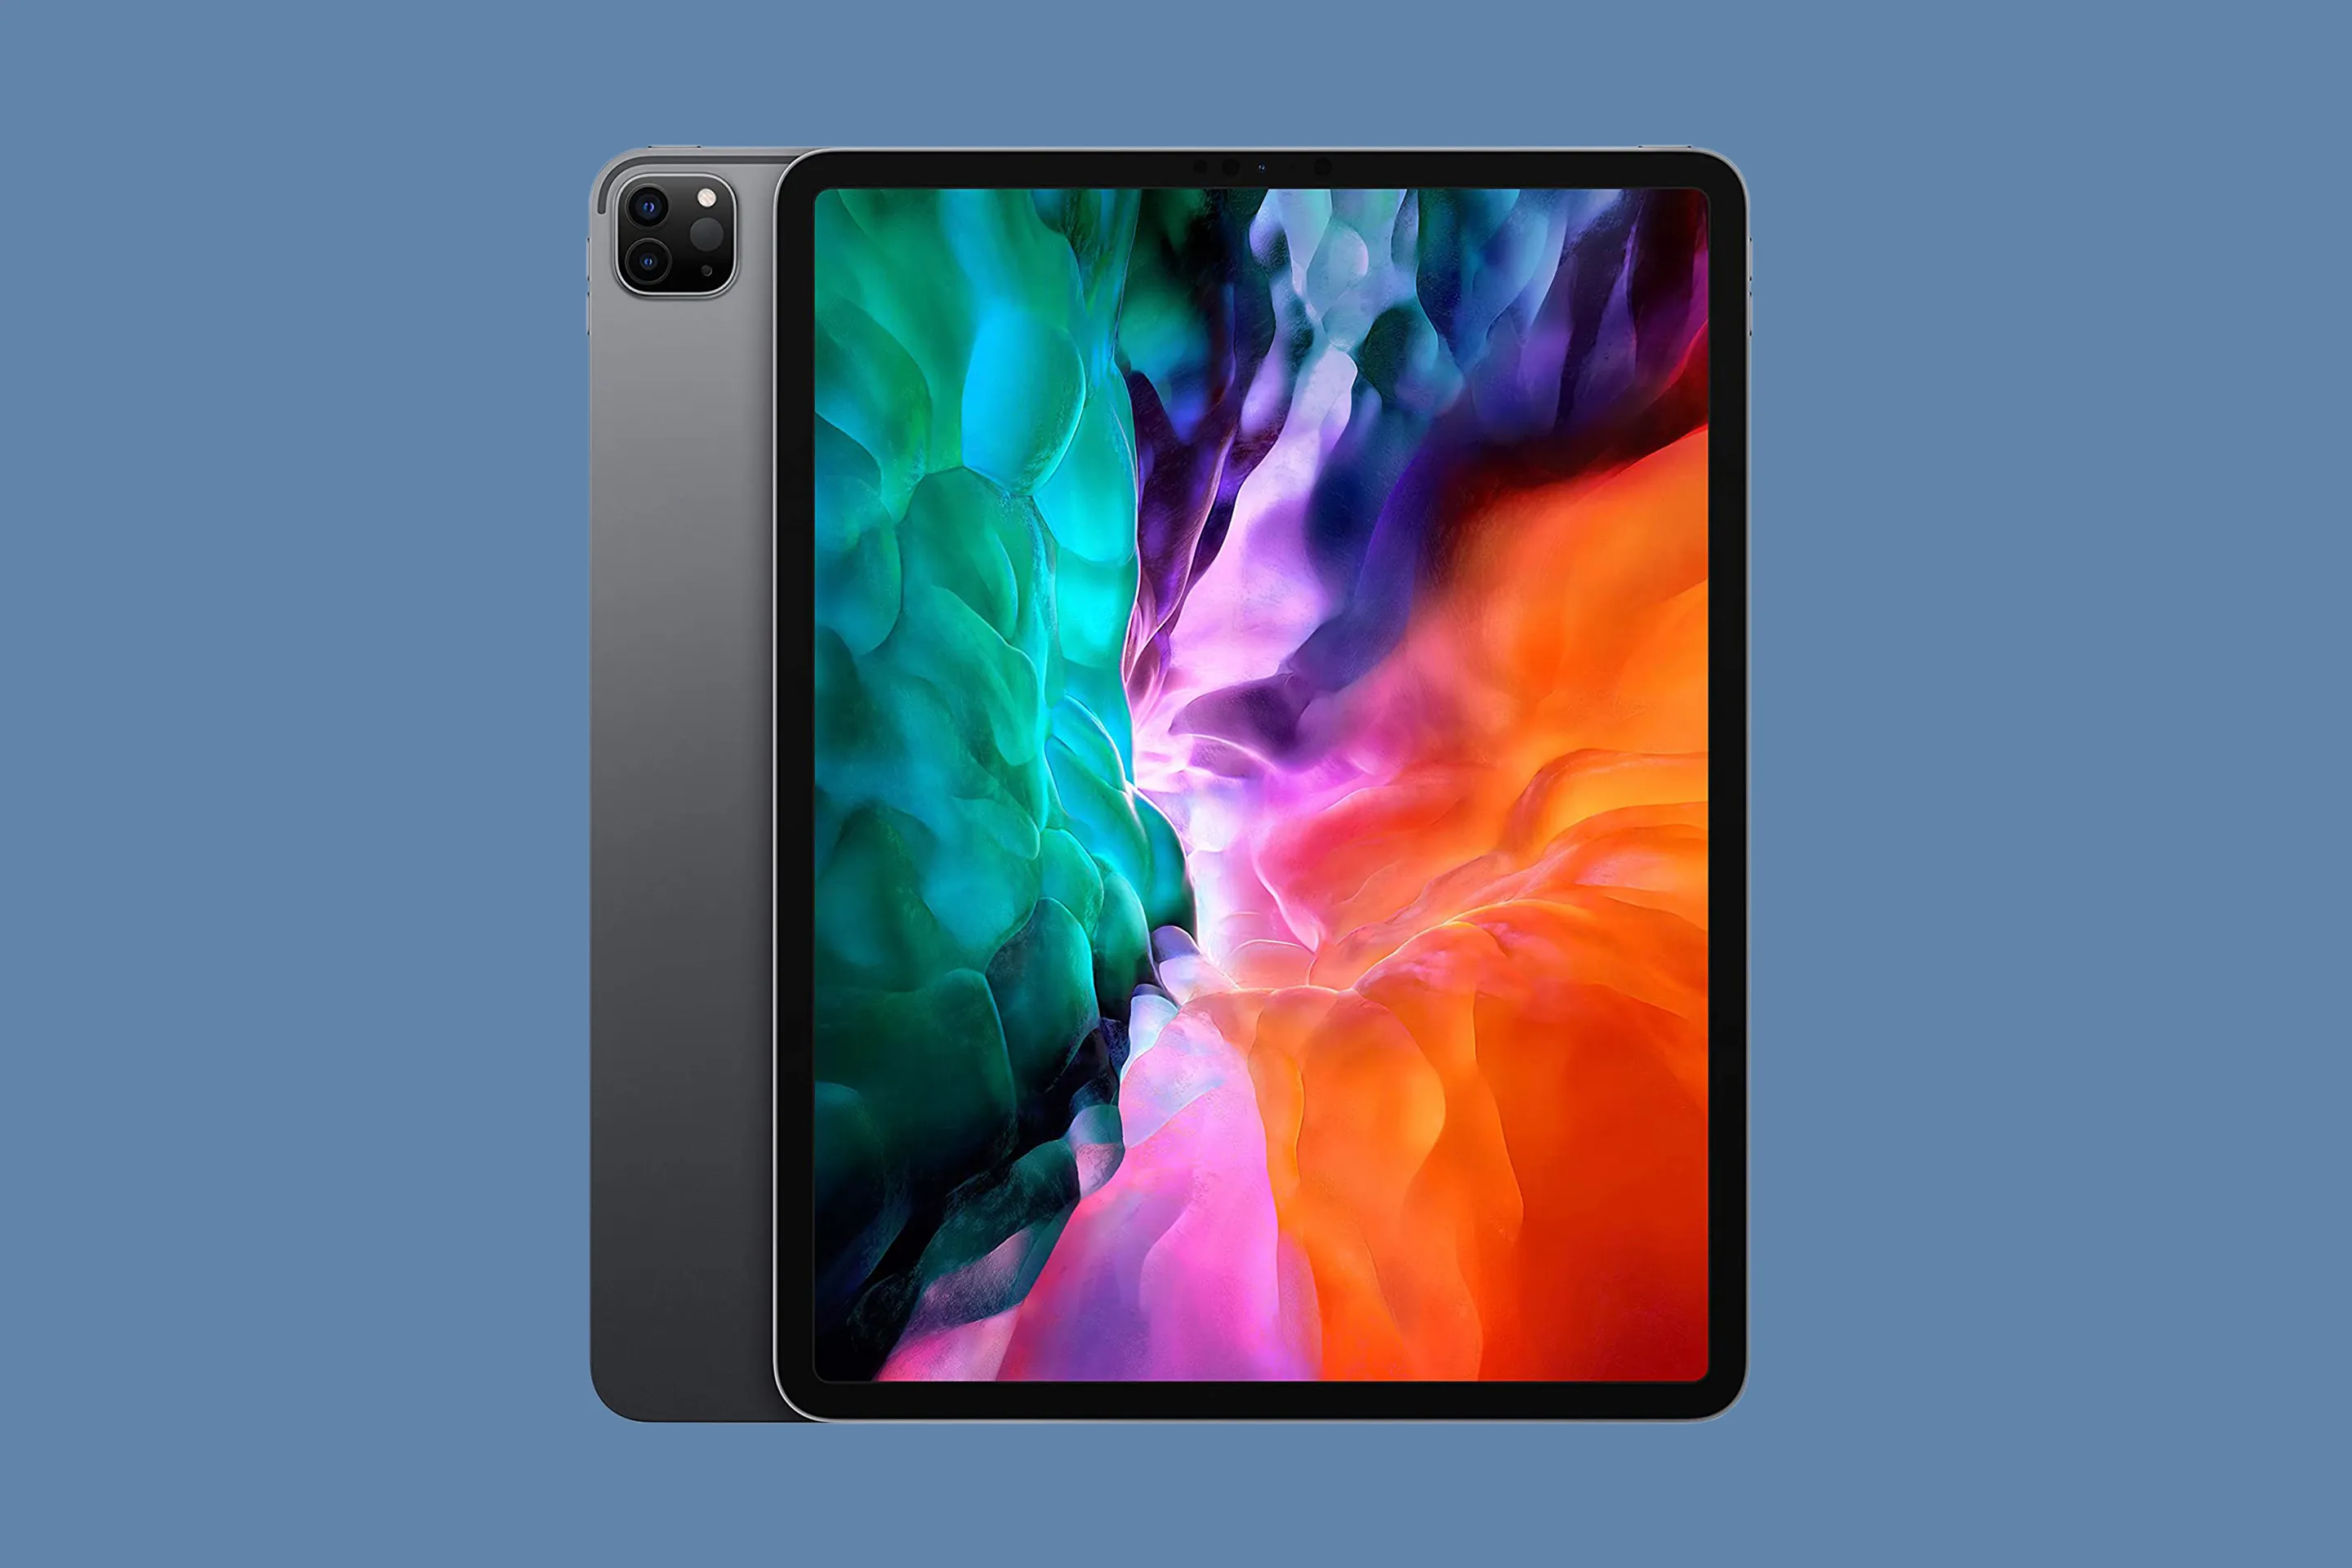 best drawing tablets for mac 2018